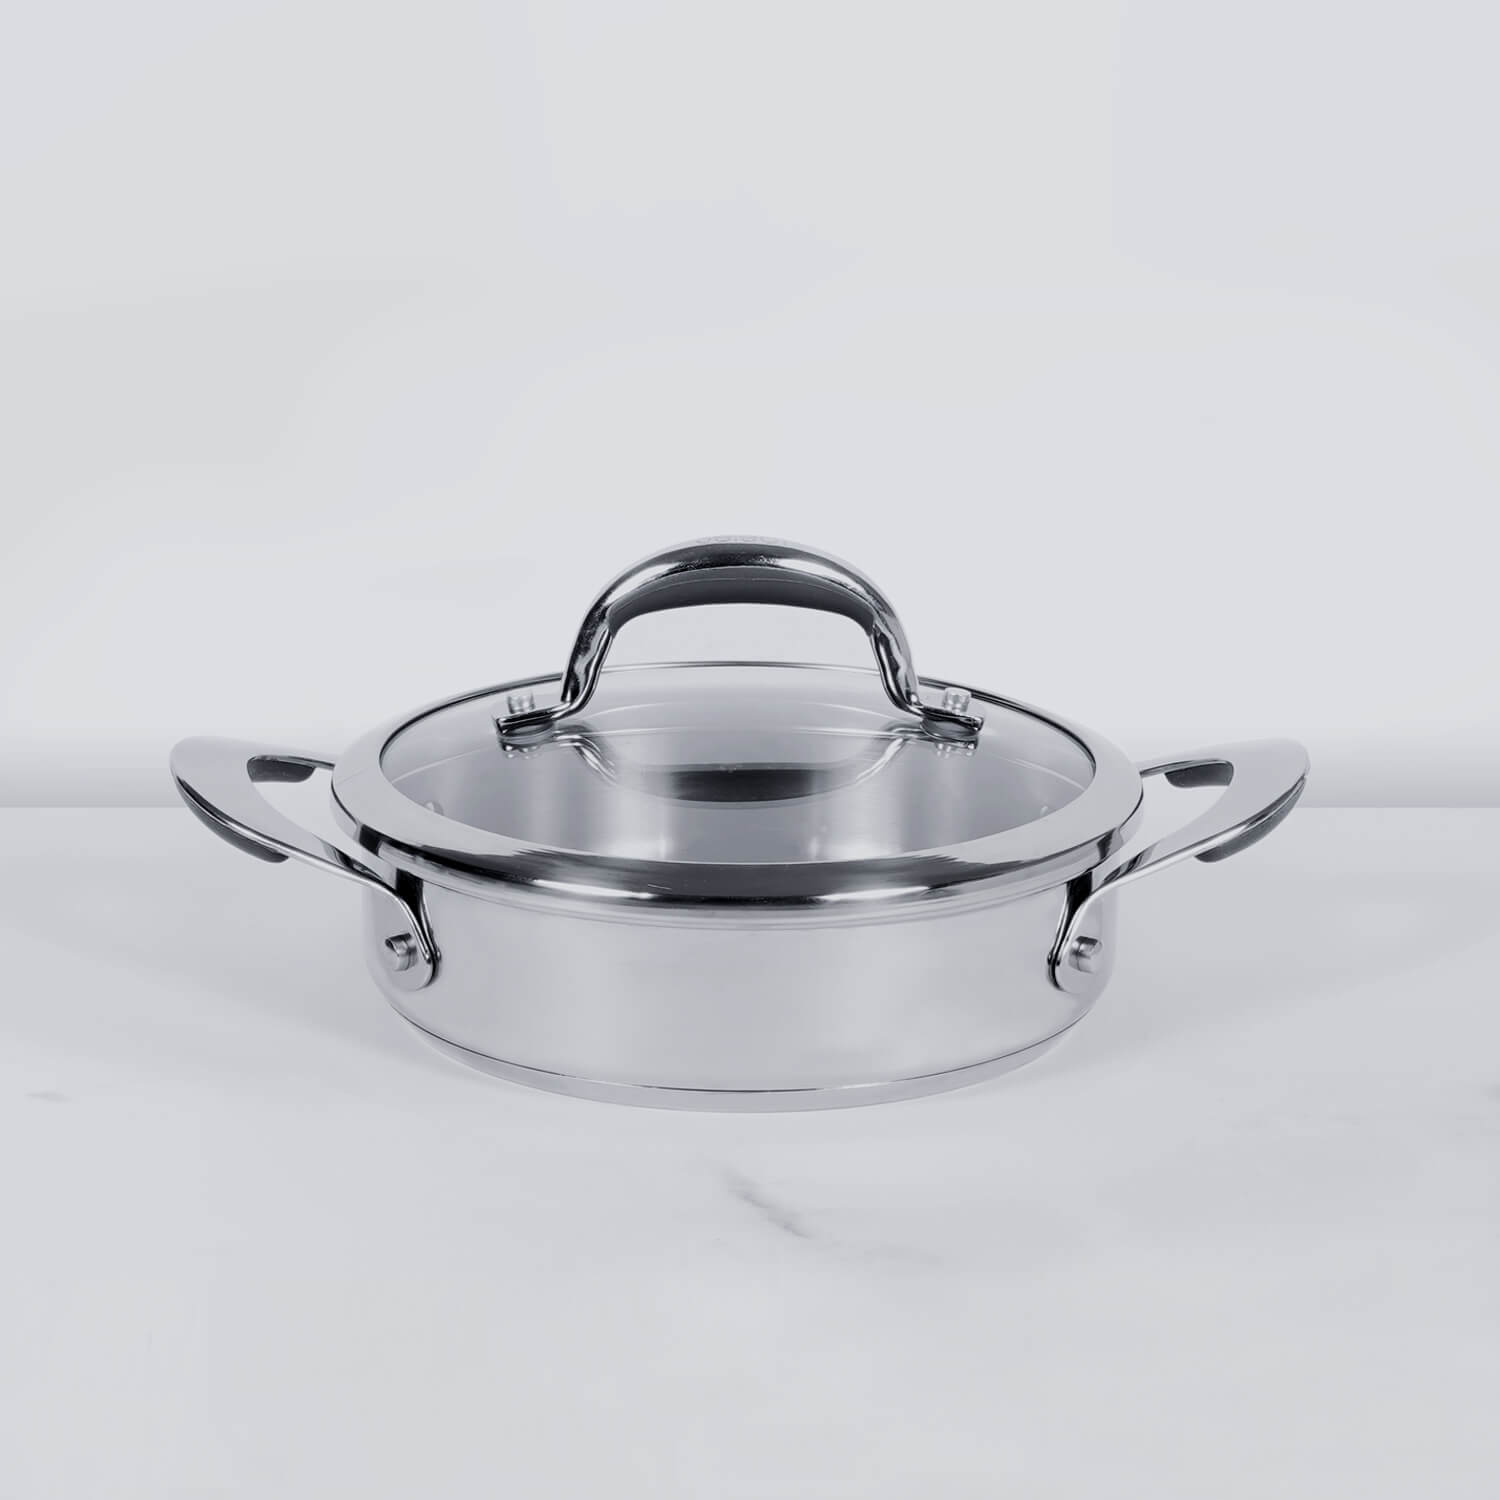 Meyer Select Stainless Steel Sauteuse 24cm (Induction & Gas Compatible) - Pots and Pans